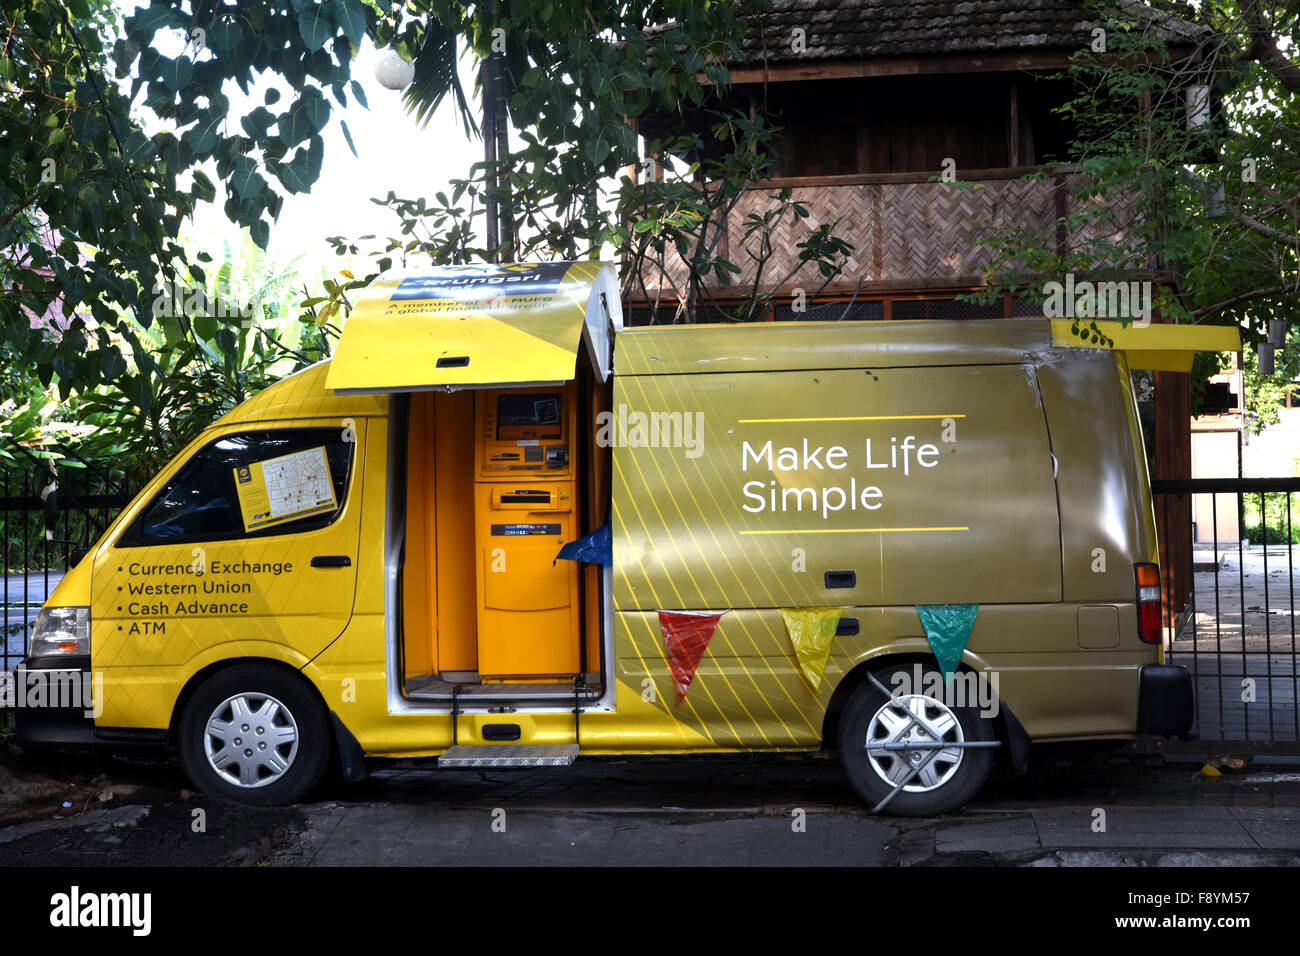 Mobile ATM in a van, Chiang Mai, Thailand Stock Photo - Alamy